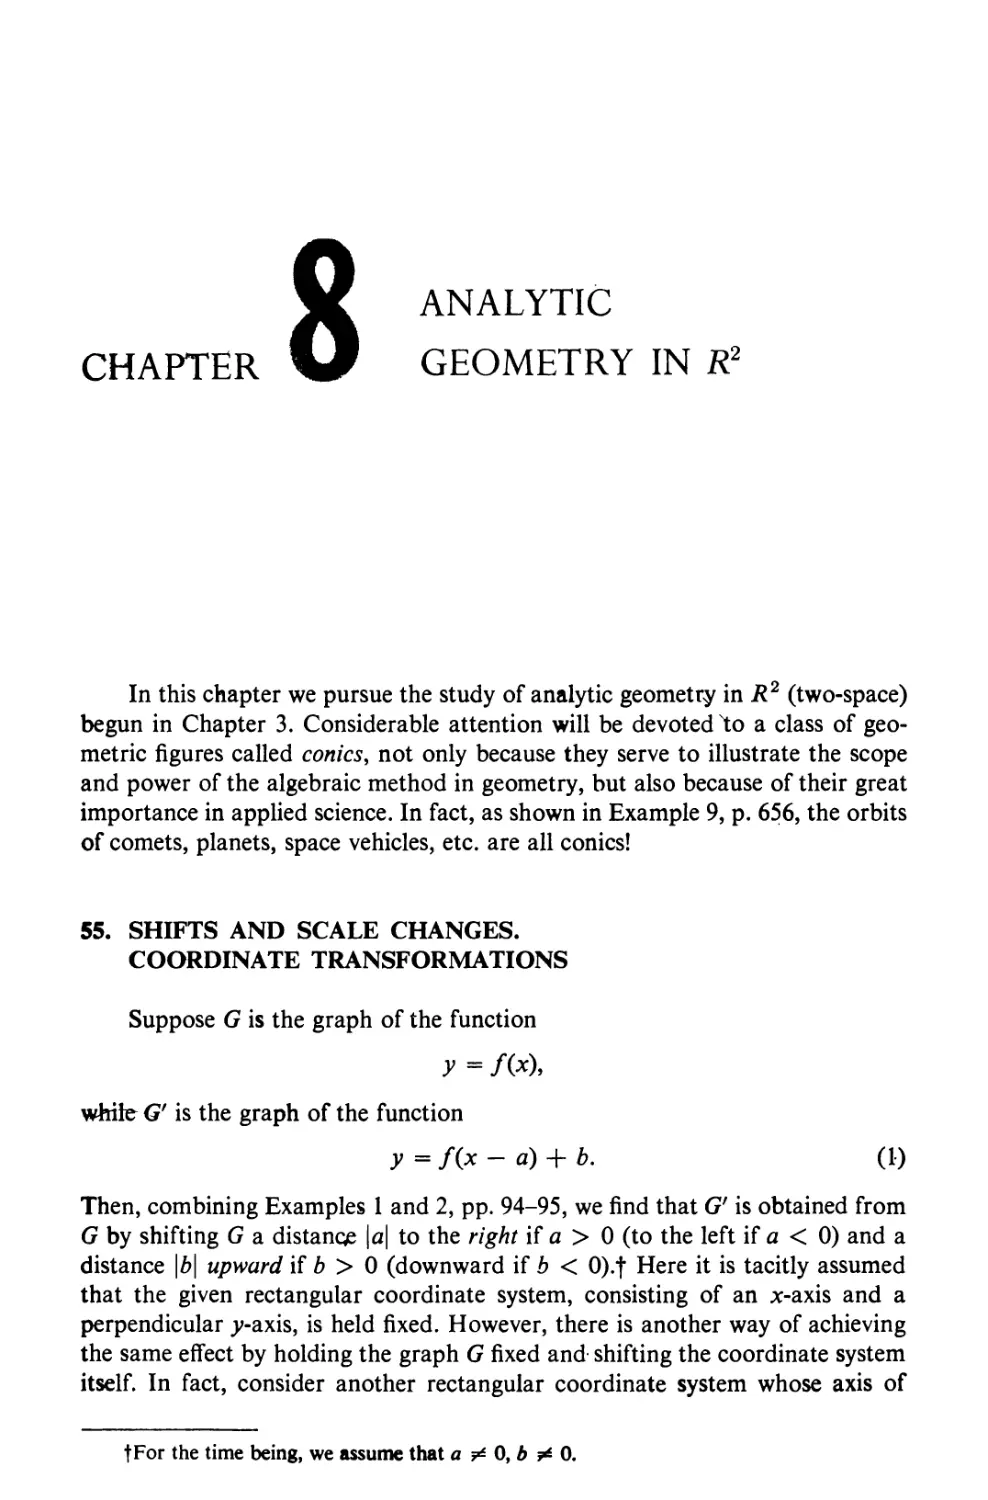 CHAPTER 8 ANALYTIC GEOMETRY IN R^2